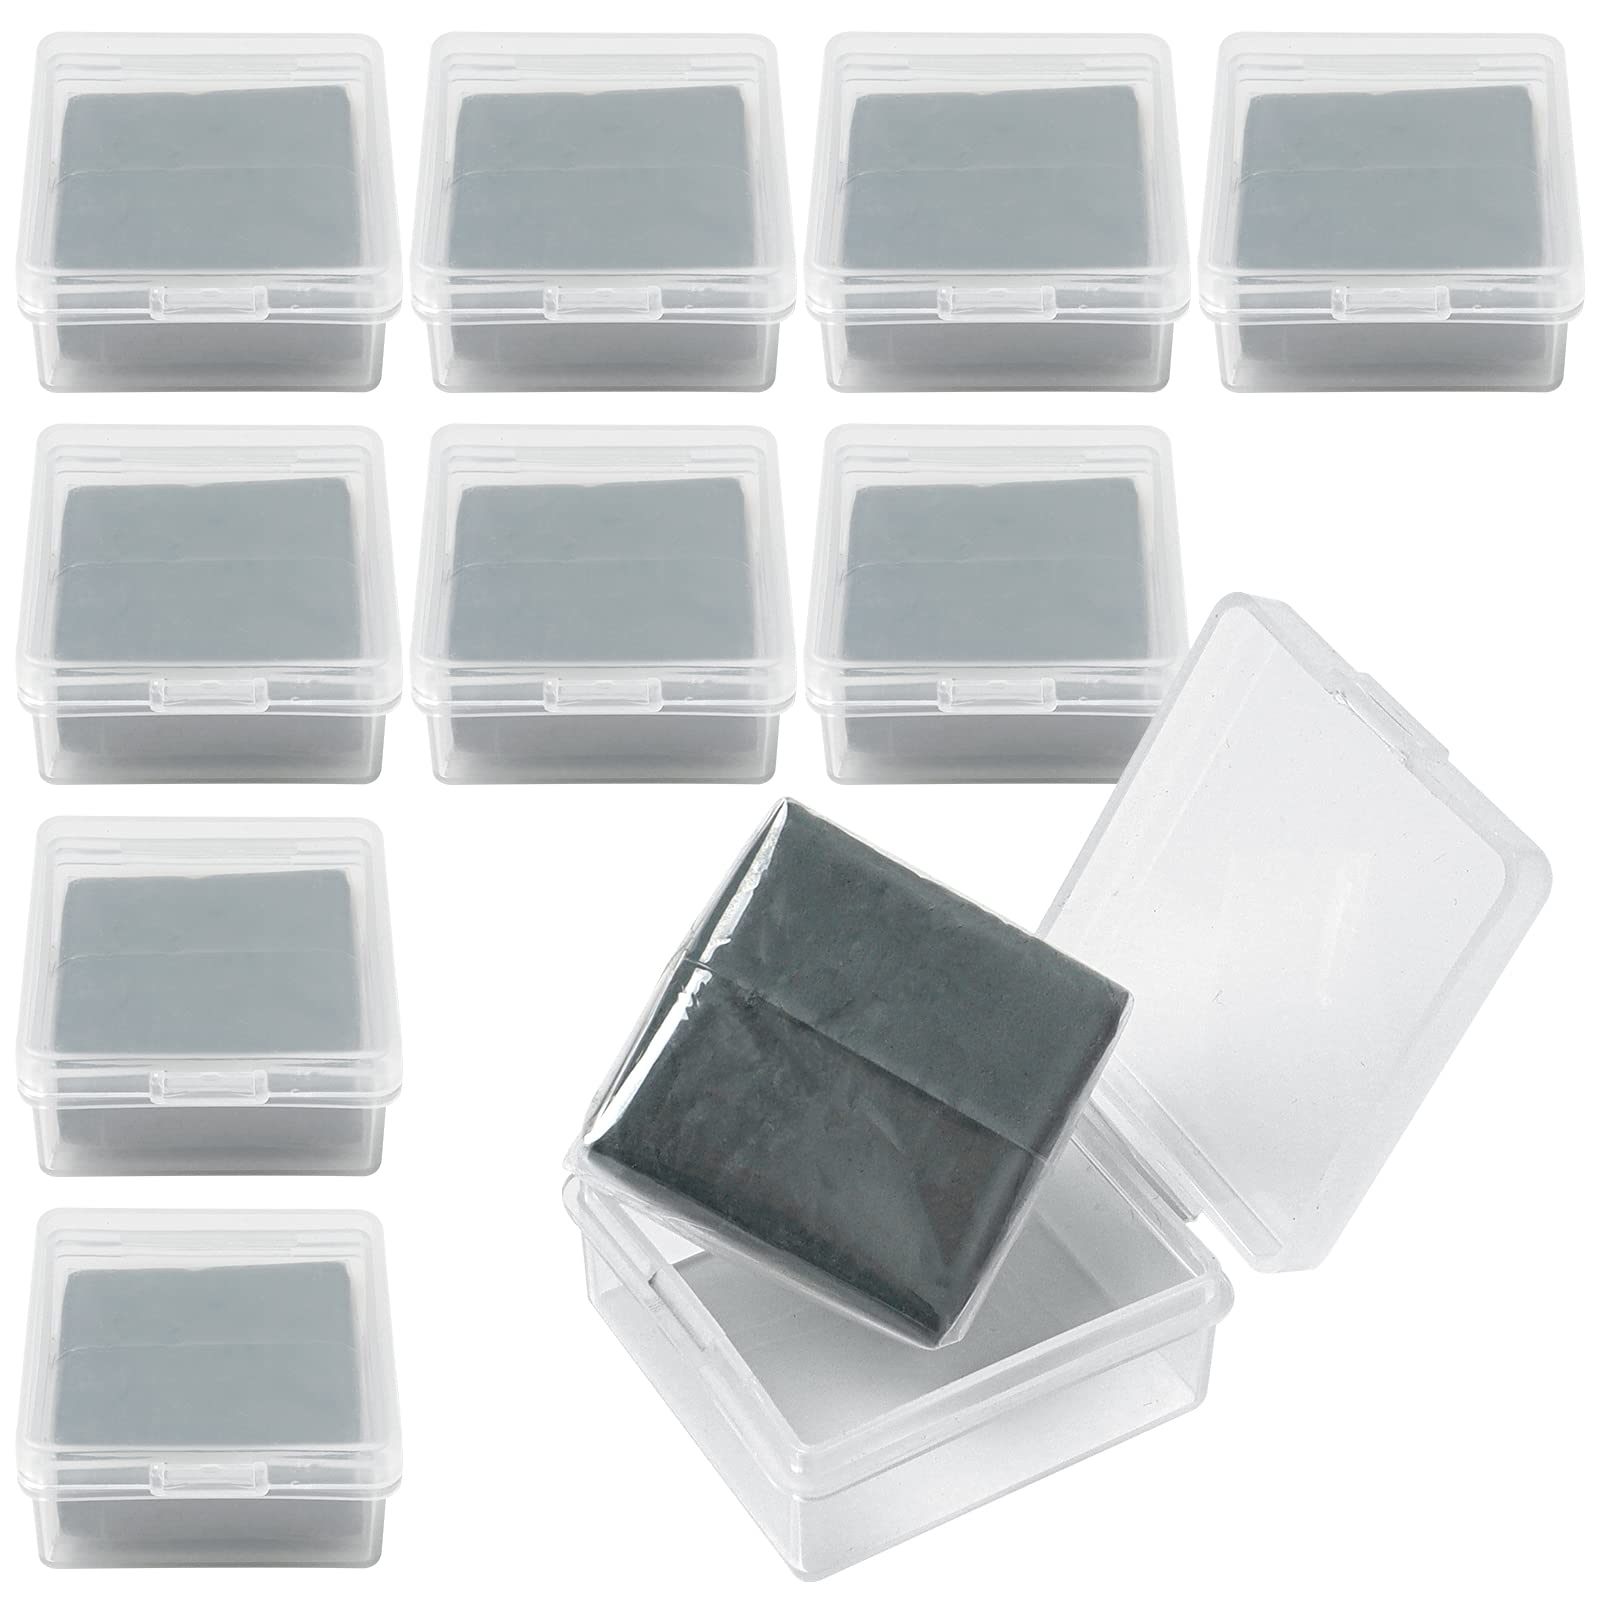 Qfeley Kneaded Rubber Erasers 10 Pack Drawing Art Kneaded Erasers